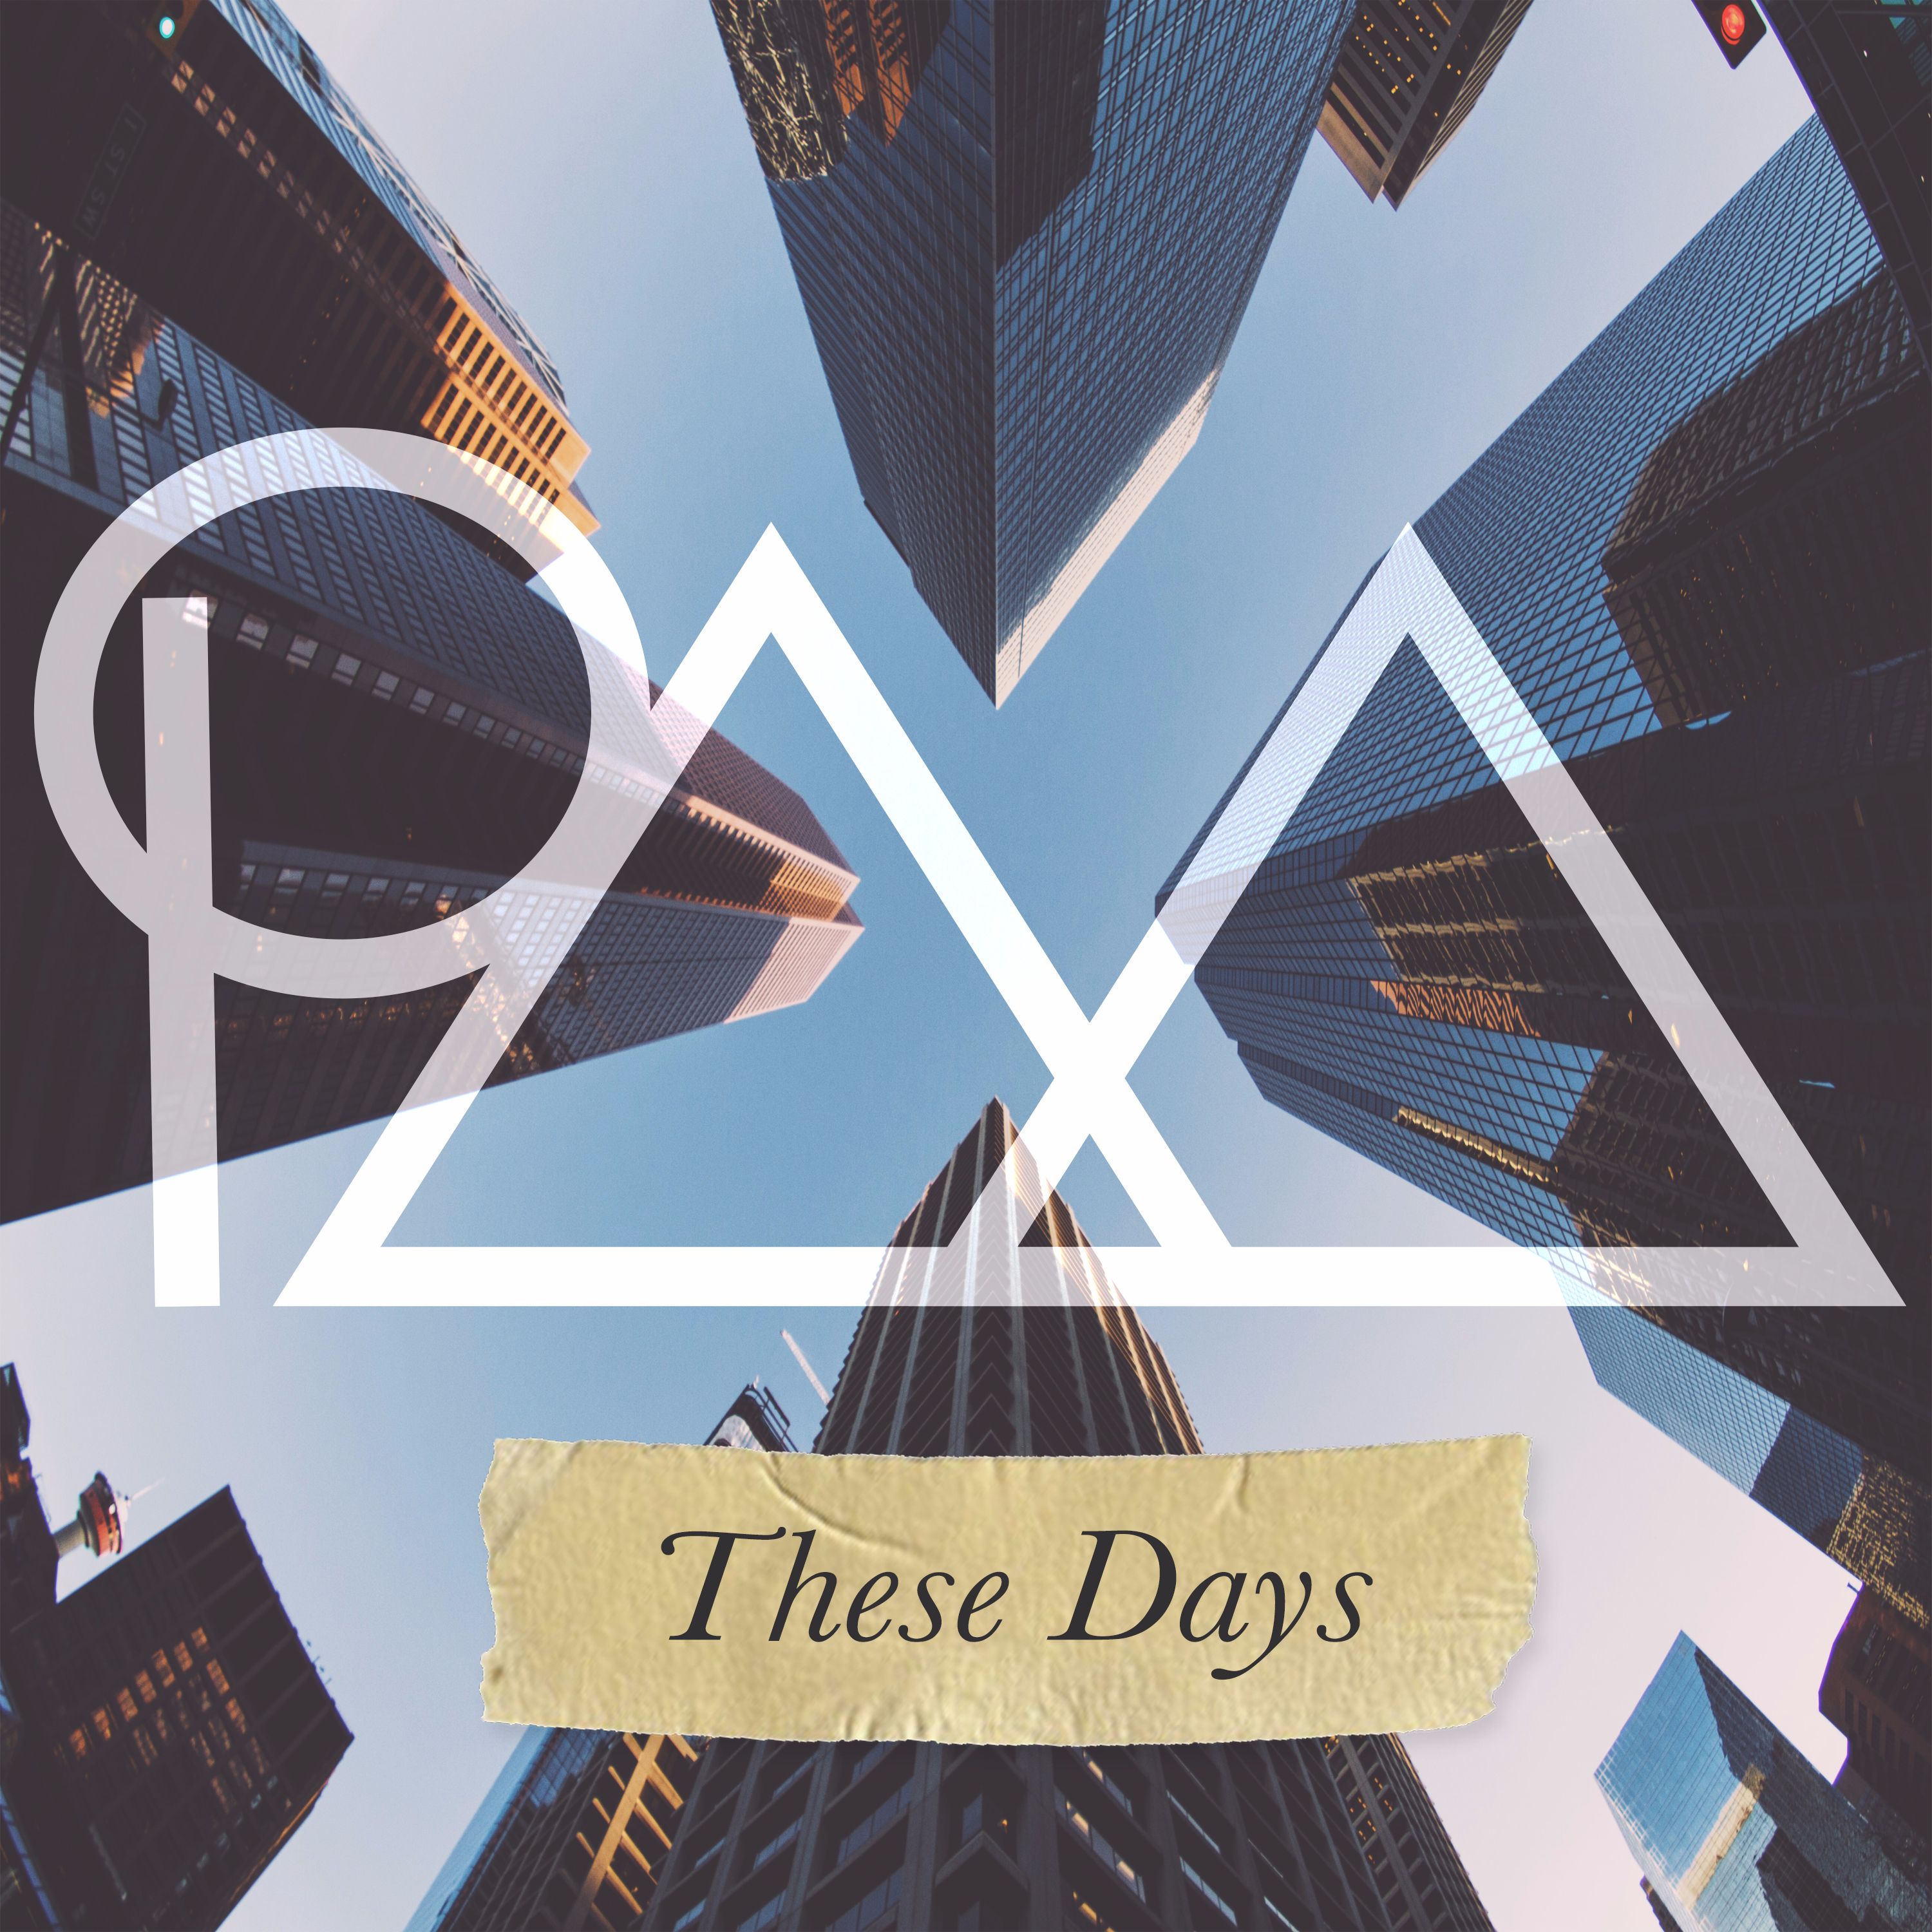 Pure Mids – “These Days”